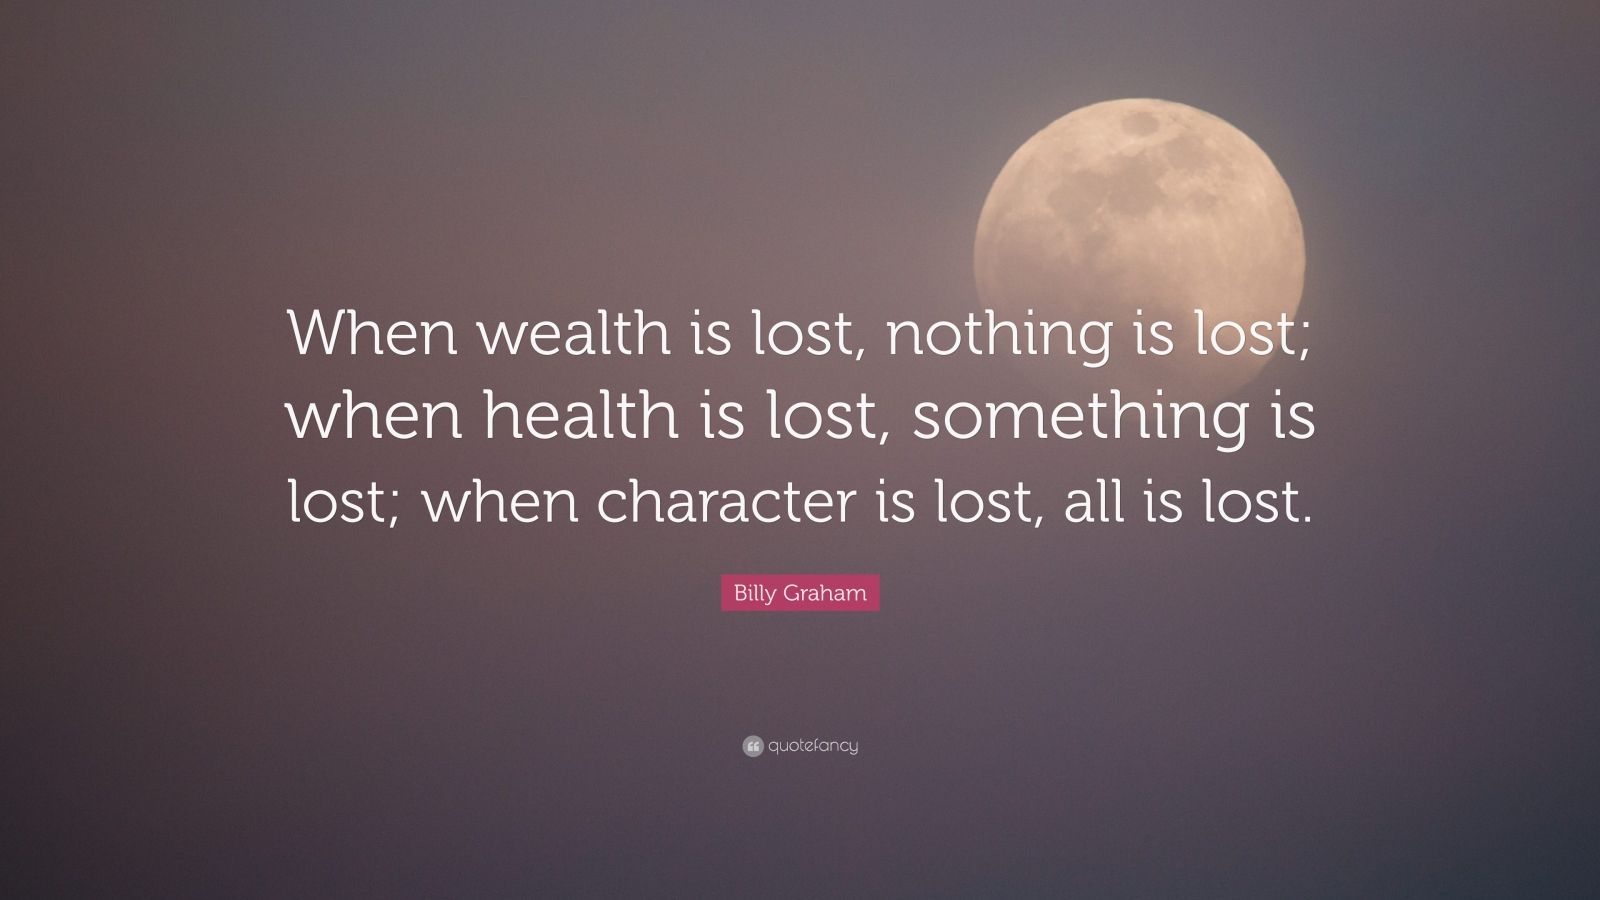 Billy Graham Quote: “When wealth is lost, nothing is lost ...